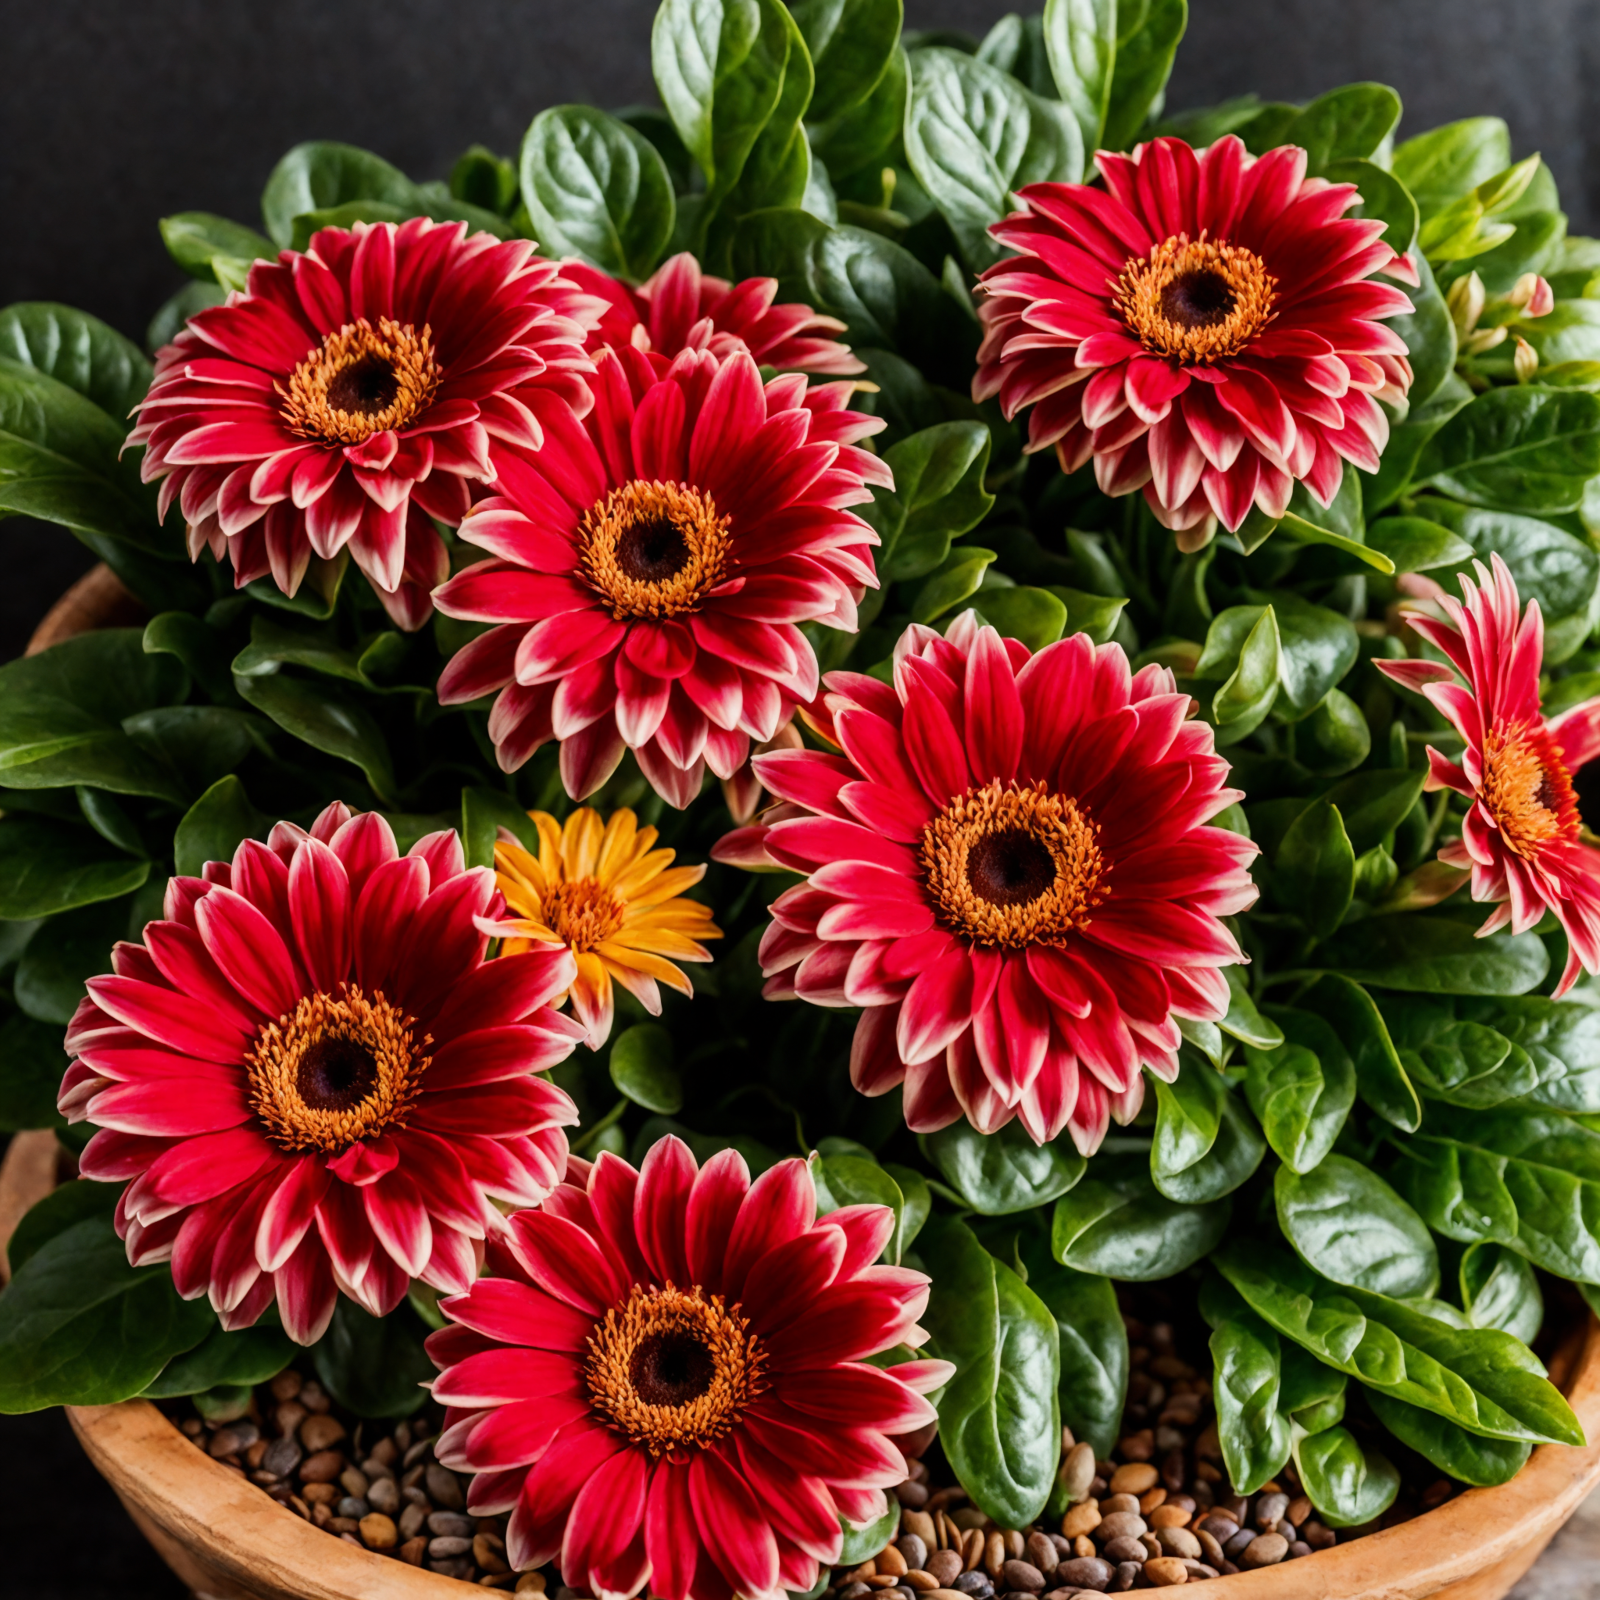 A vibrant Gerbera jamesonii with red blooms in a wooden bowl, clear indoor lighting, against a dark background.